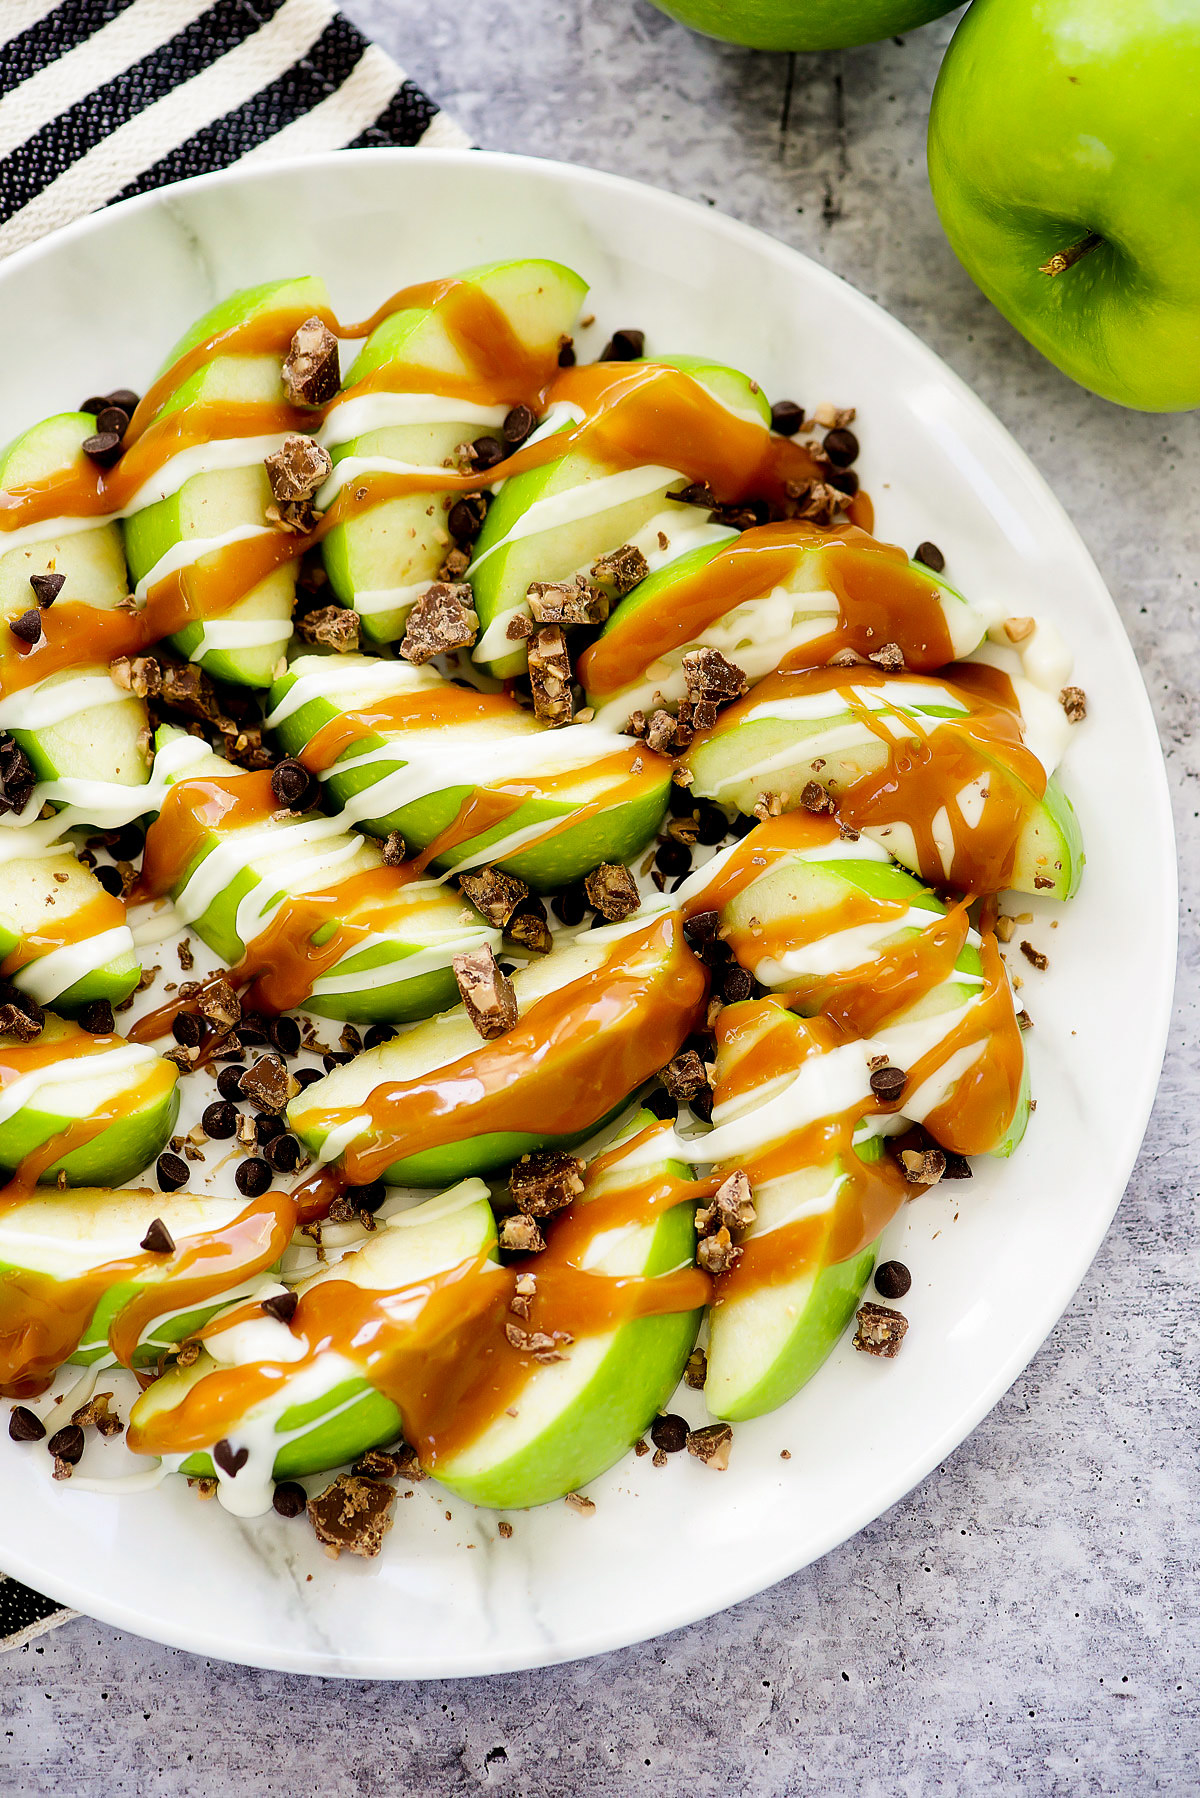 Sliced green apples topped with caramel and heath bar.